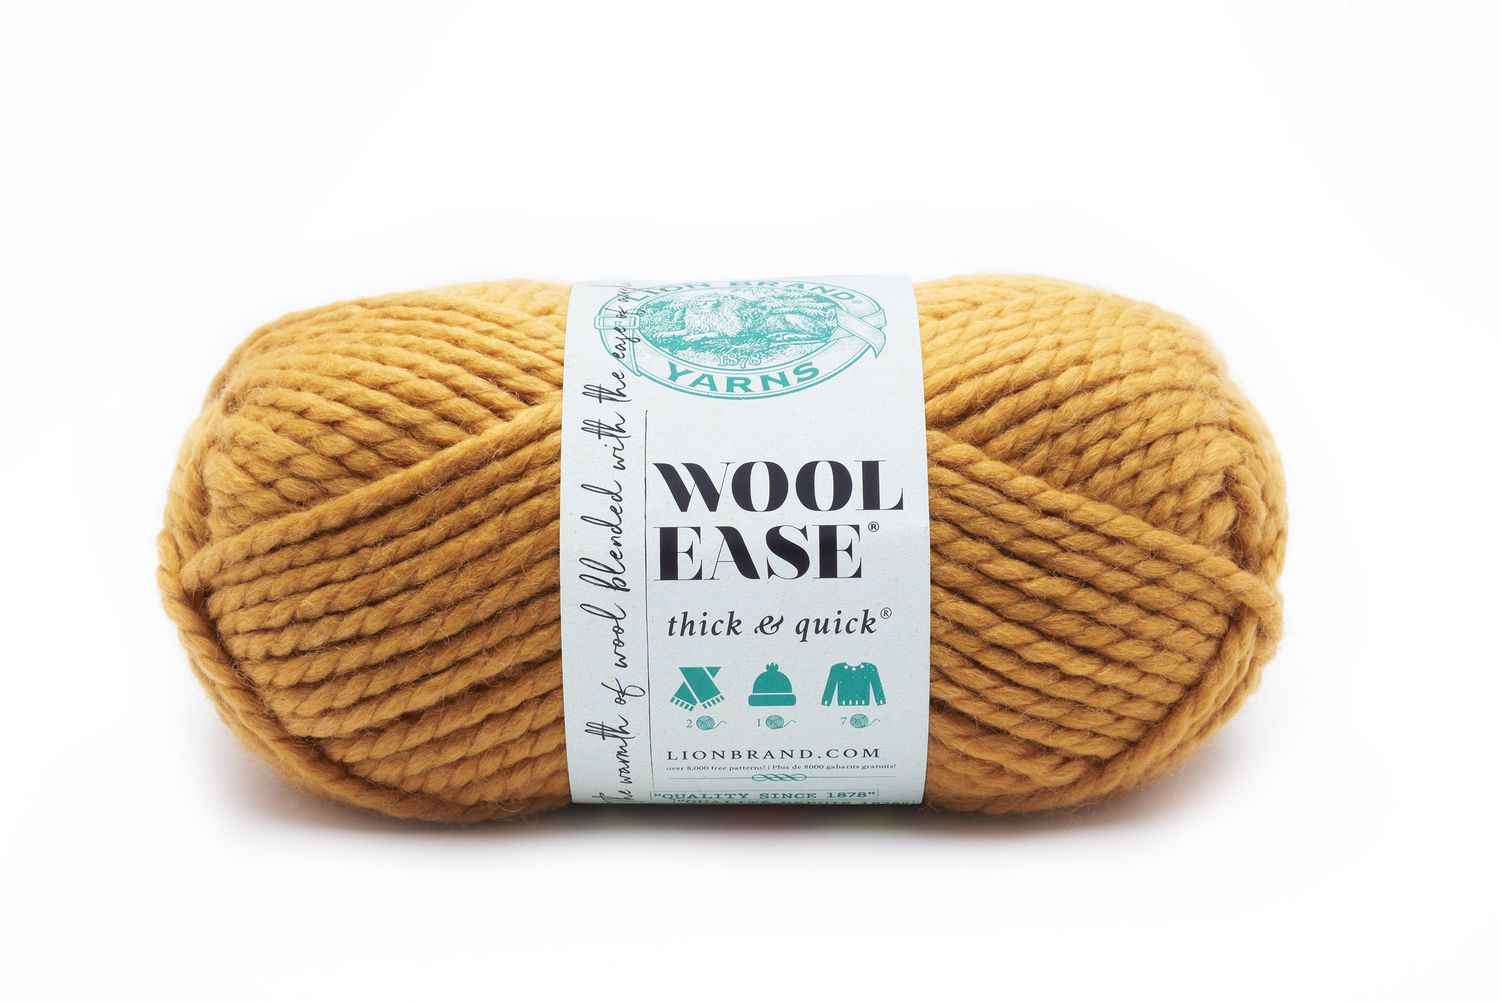 Lion Brand Yarn Wool Ease Thick & Quick Oatmeal 640-123 Classic